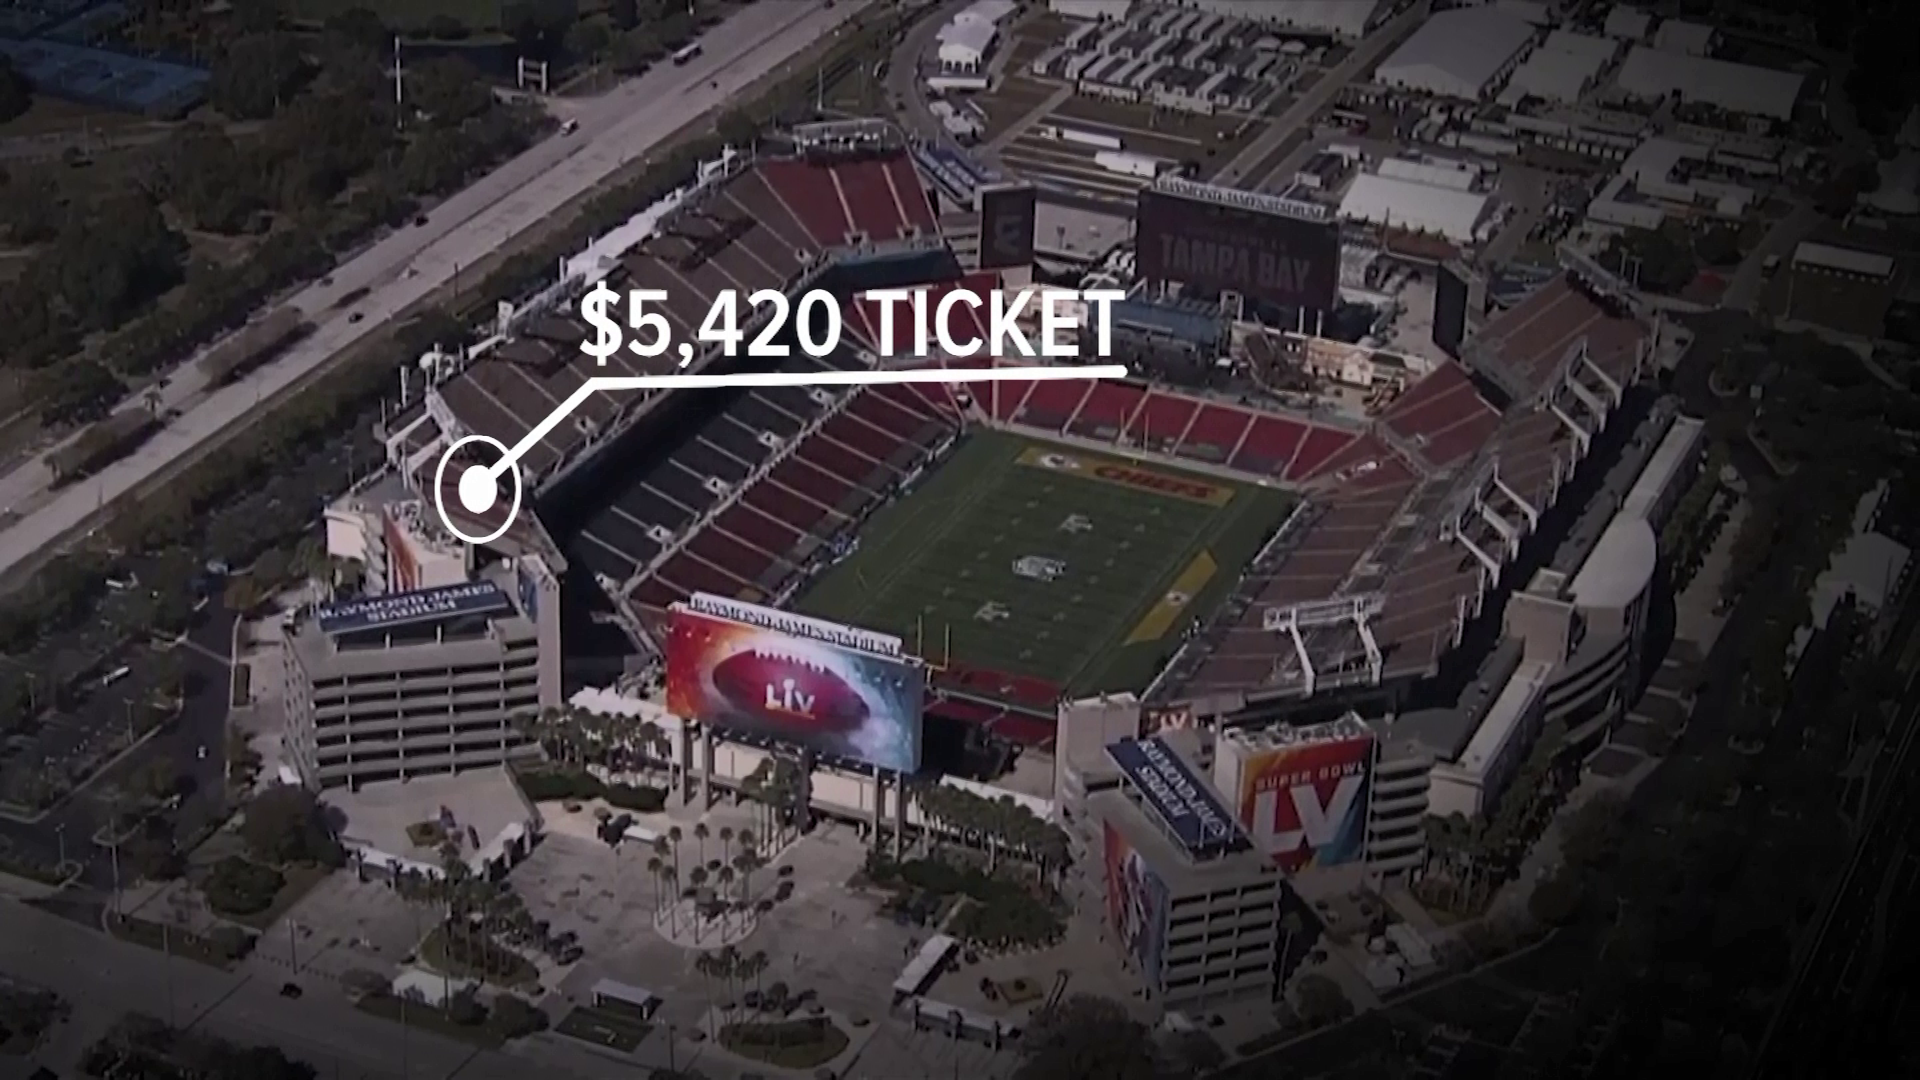 price for the super bowl tickets